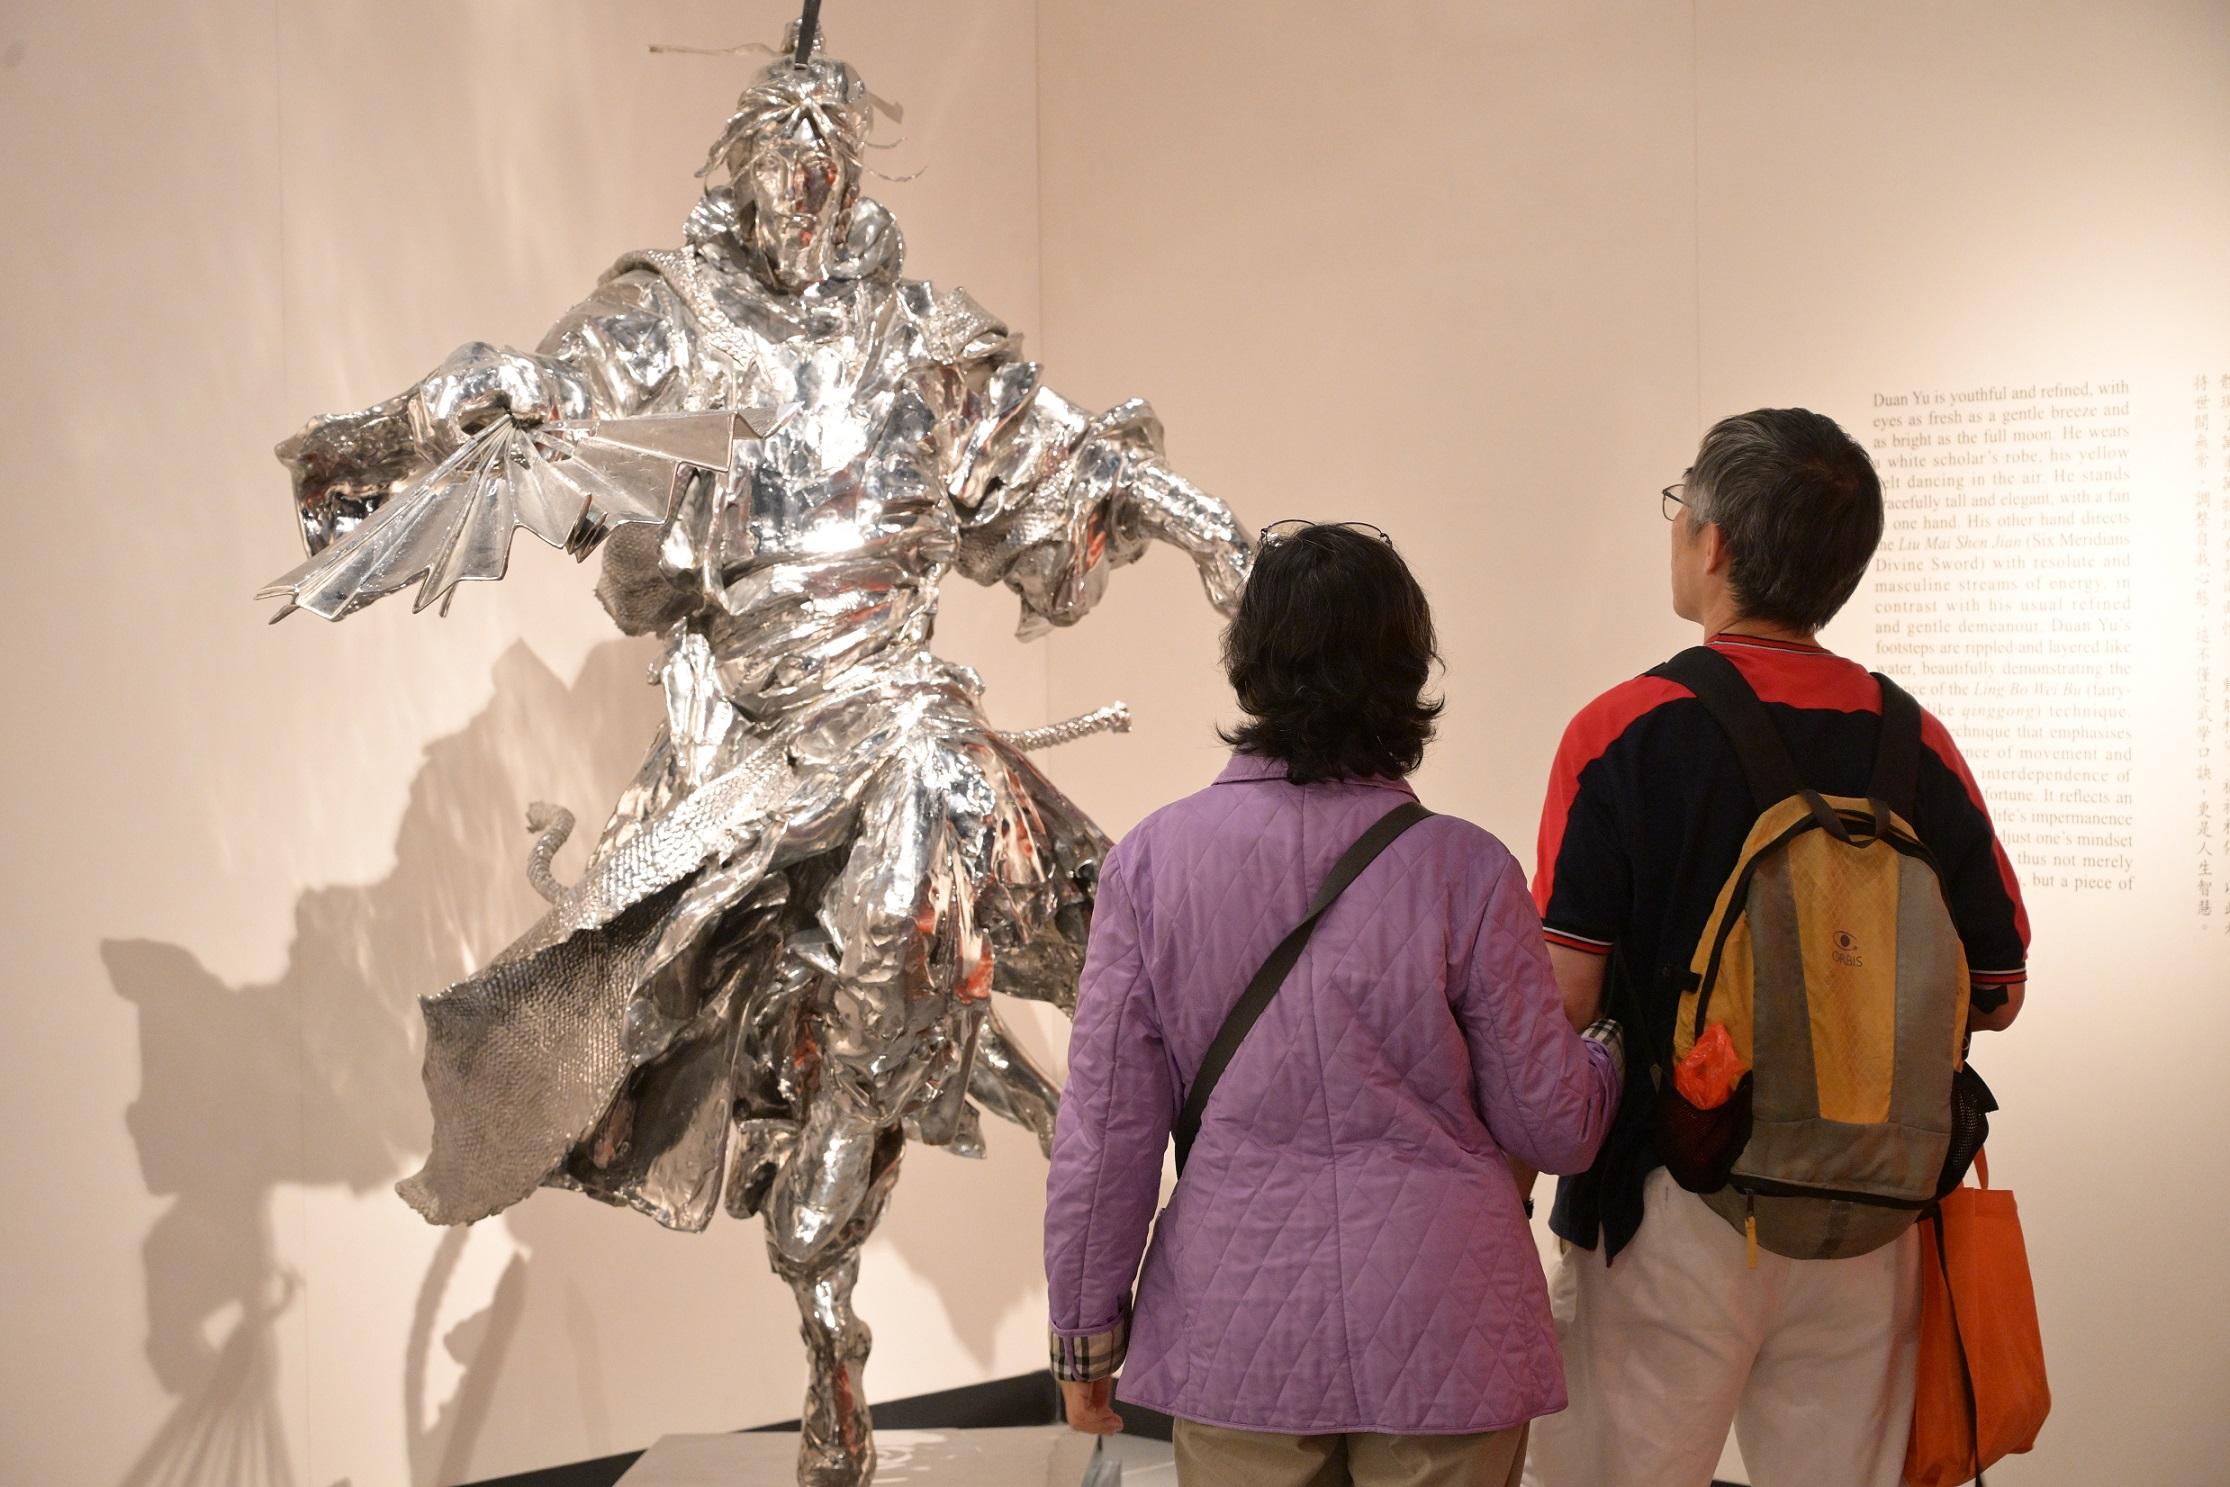 The "A Path to Glory - Jin Yong’s Centennial Memorial, Sculpted by Ren Zhe" exhibition at the Hong Kong Heritage Museum has reached 100 000 visitors since its opening on March 16. Photo shows visitors touring the exhibition.